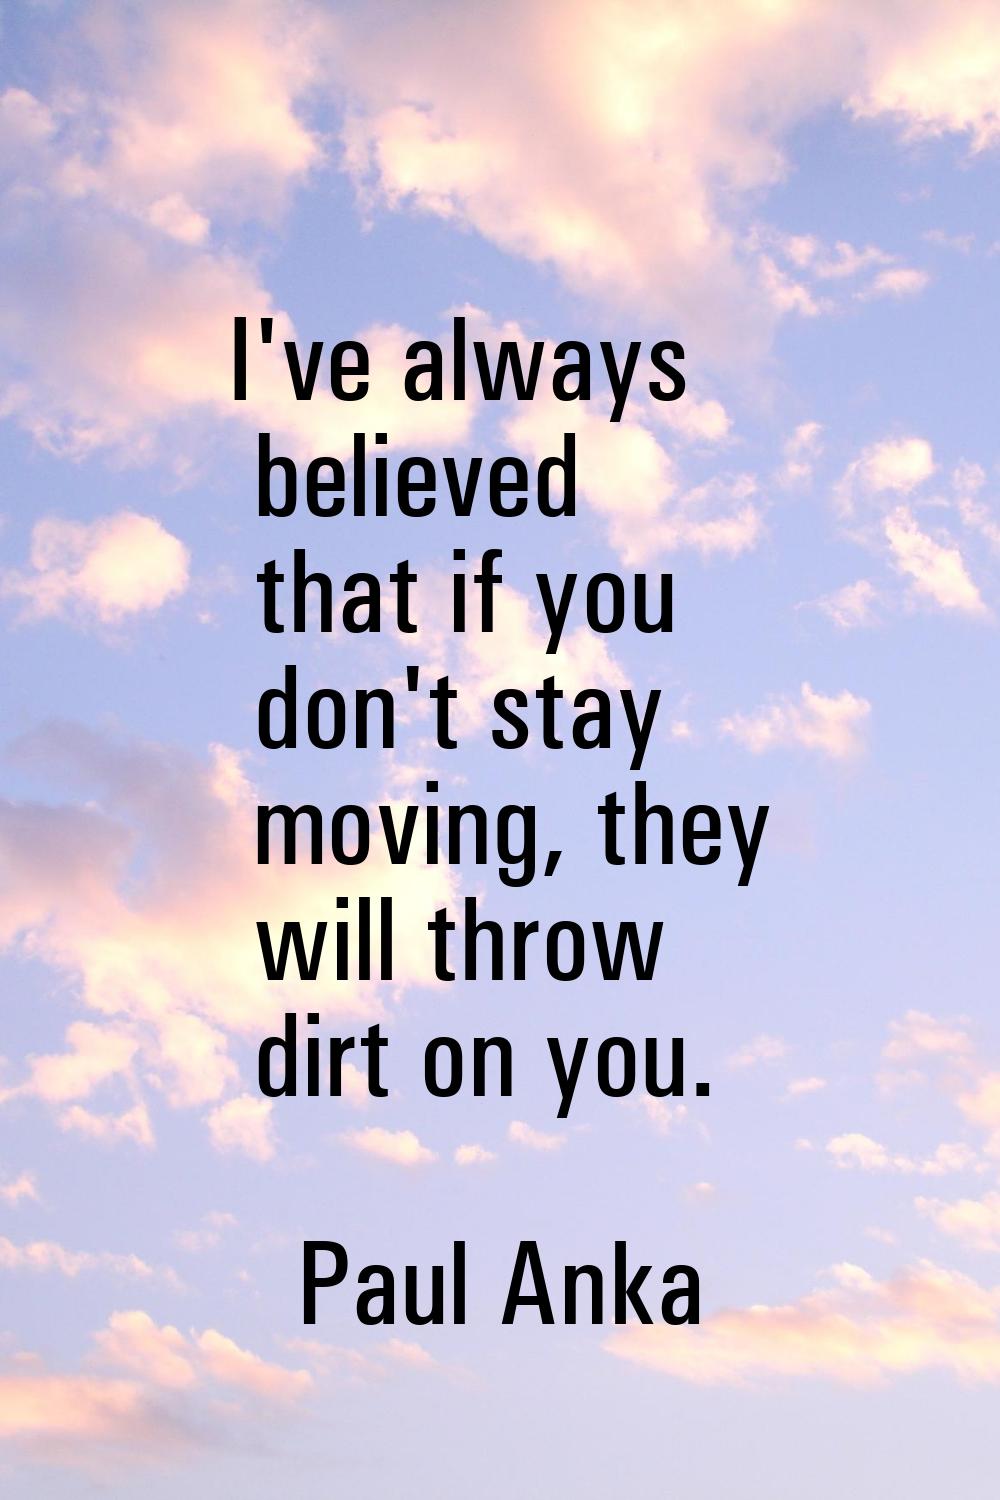 I've always believed that if you don't stay moving, they will throw dirt on you.